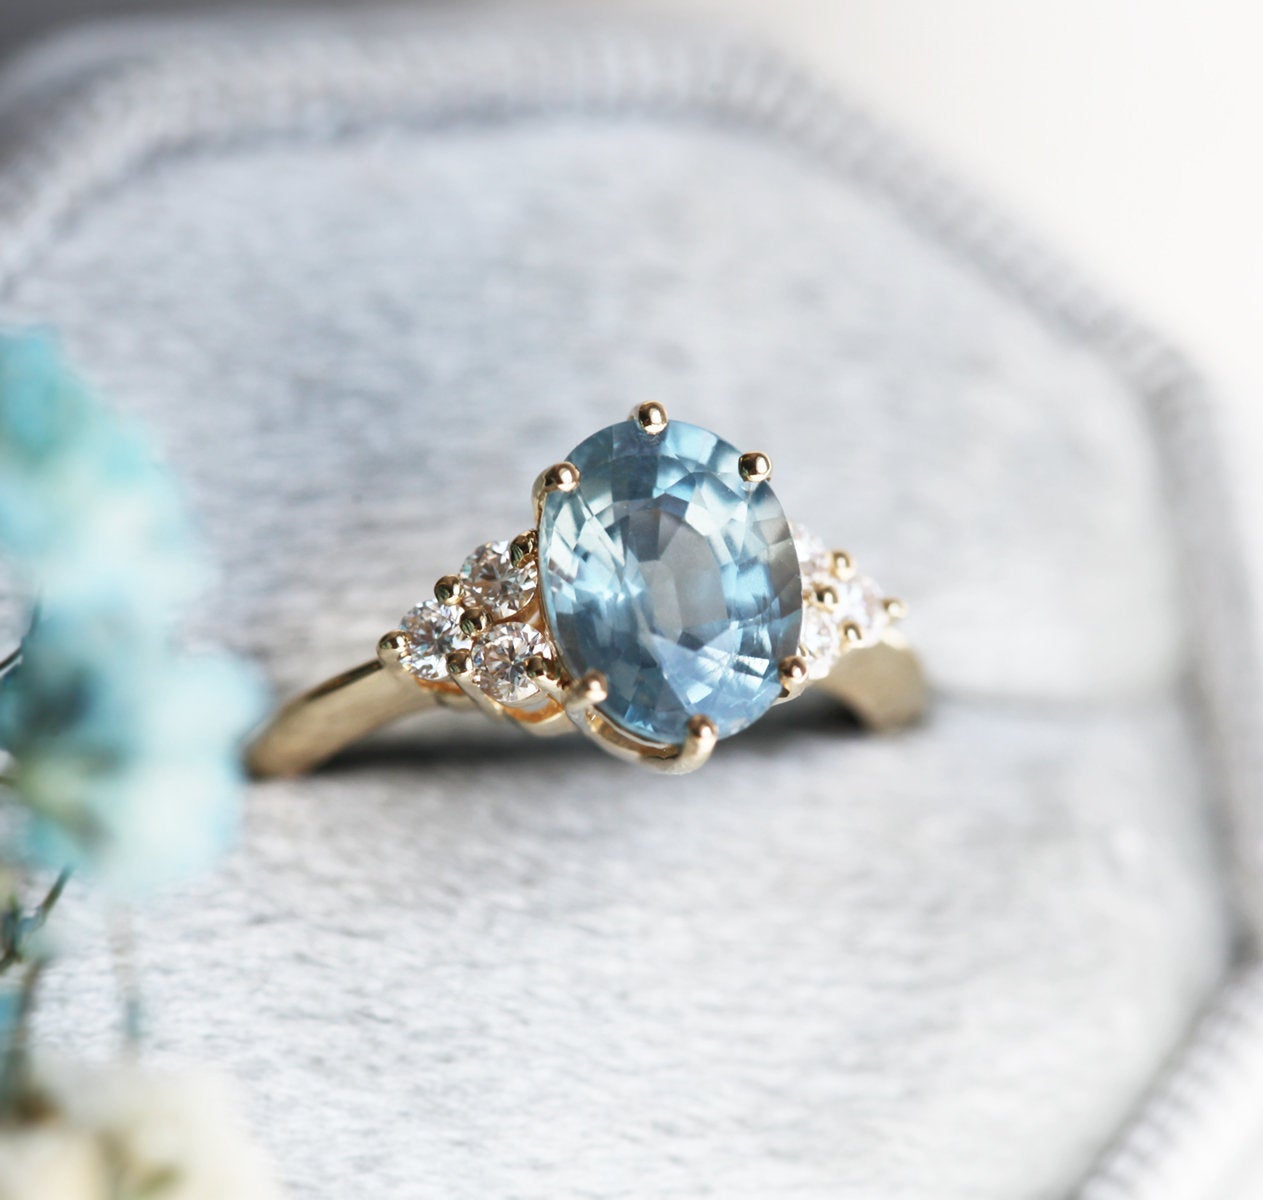 Oval-shaped blue sapphire ring with diamond cluster